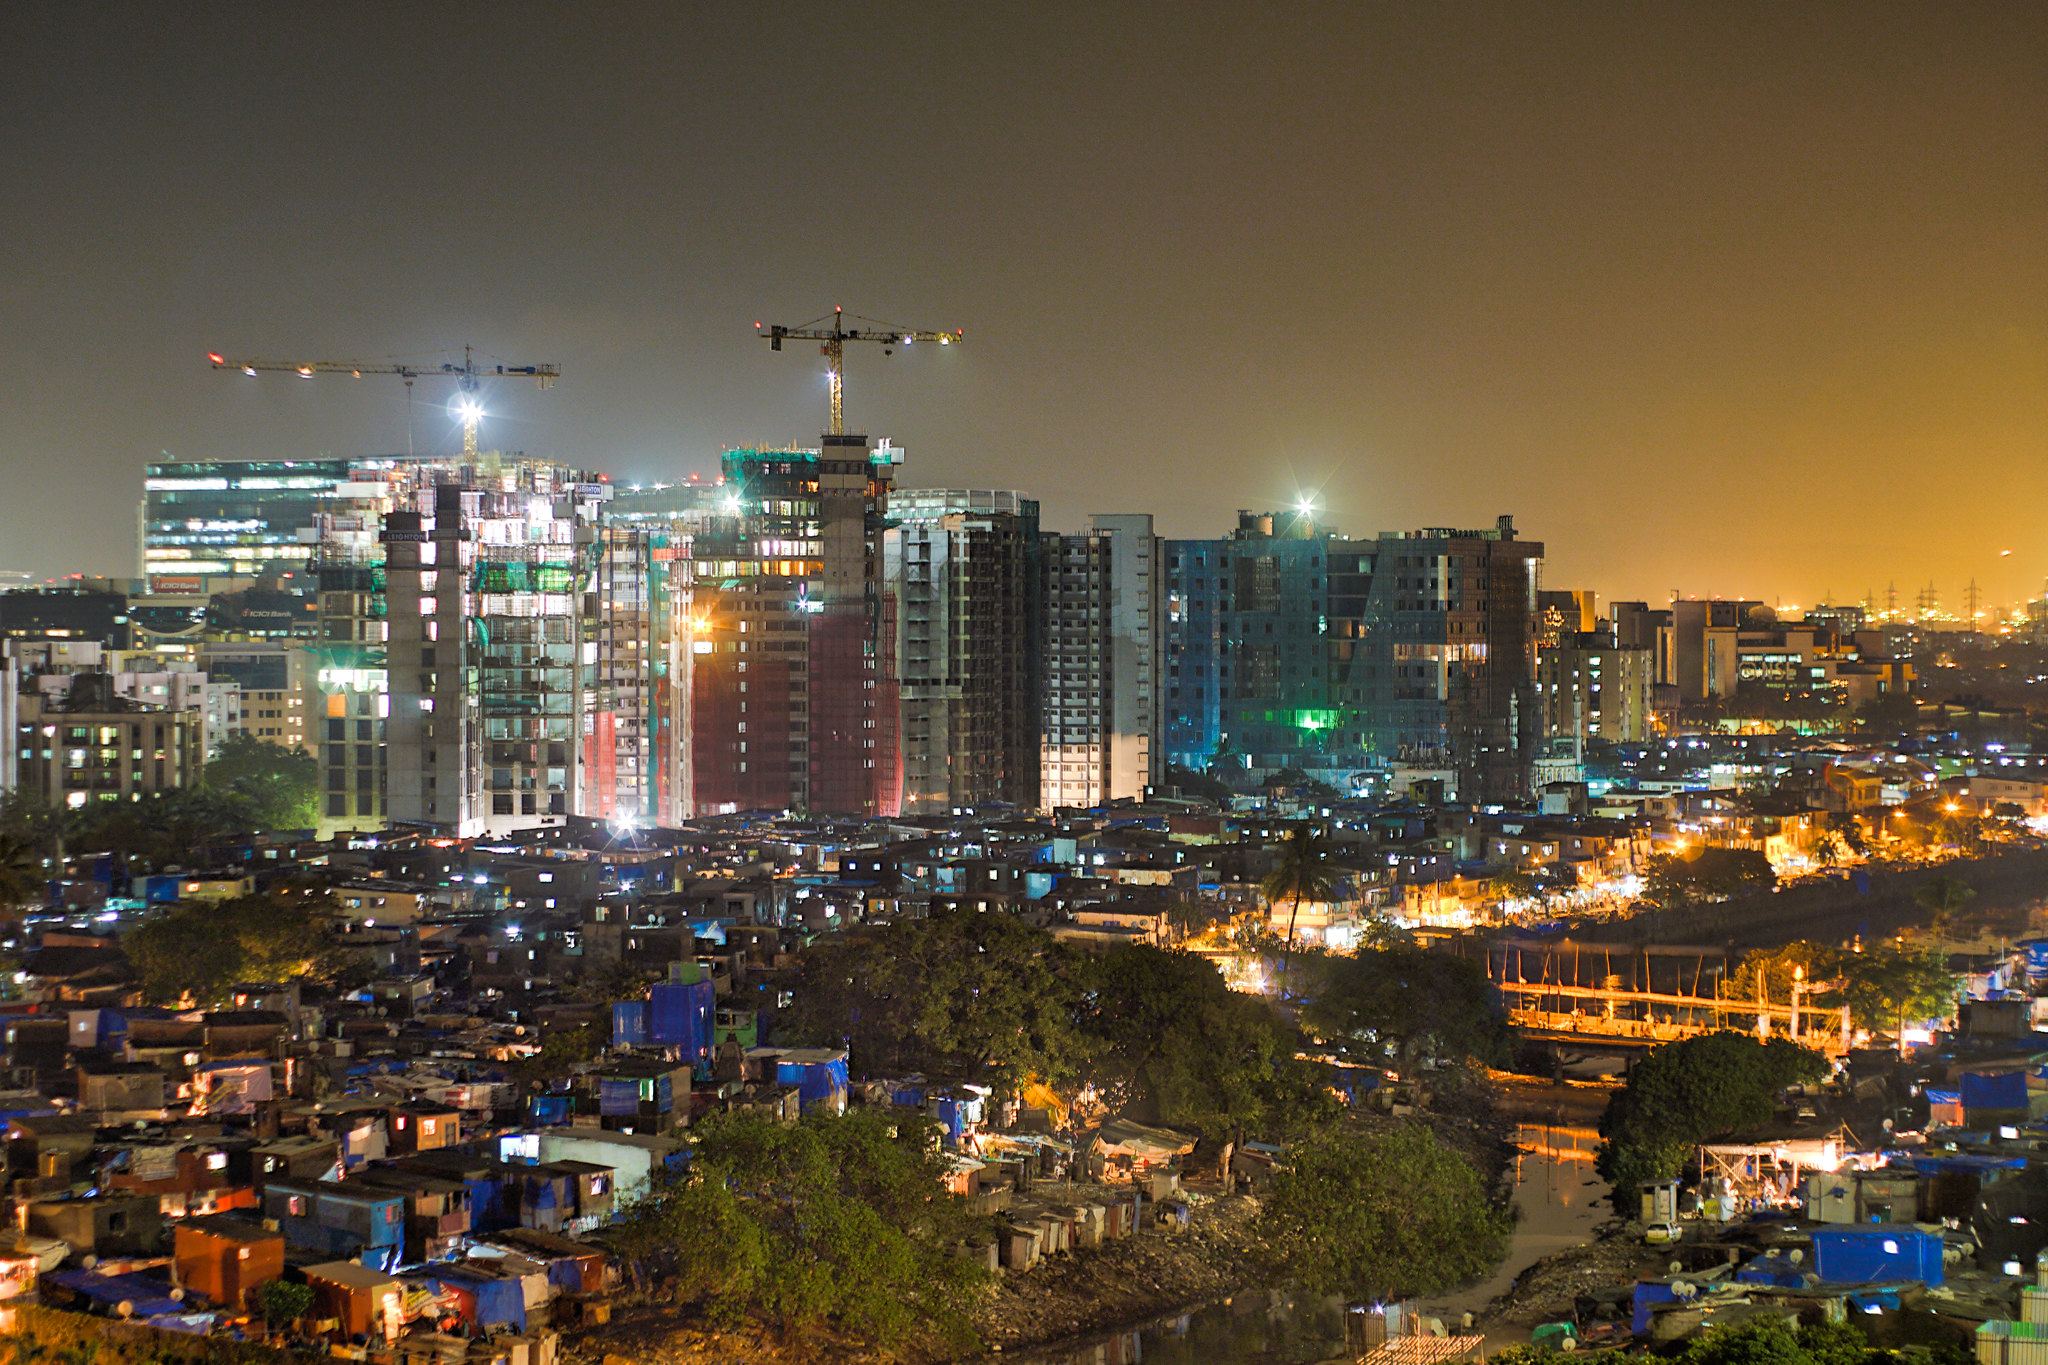 High-rise apartments in Mumbai are an outward sign of India’s growing prosperity, but challenges with wealth distribution and unemployment linger. : Logan King / Flickr